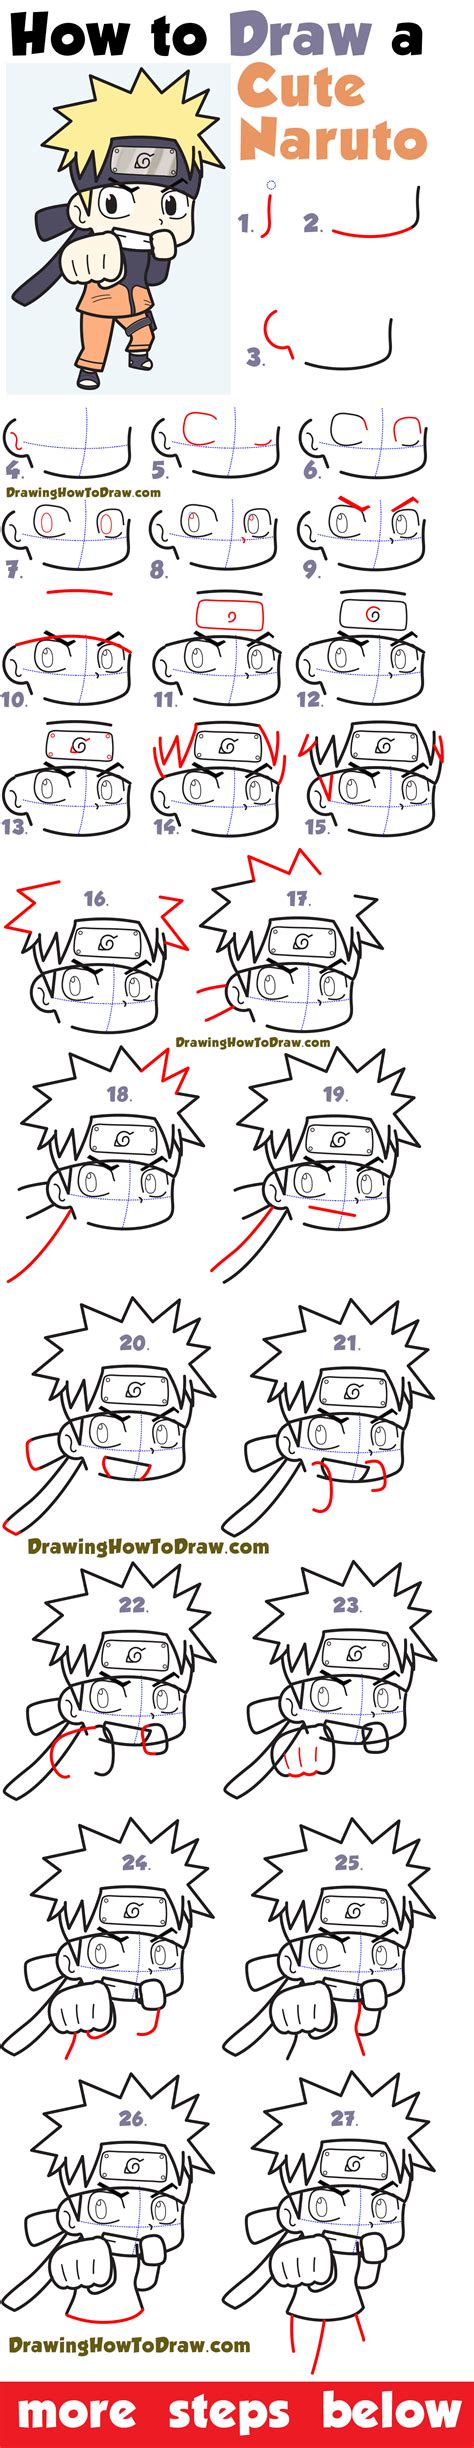 How To Draw A Cute Chibi Naruto Easy Step By Step Drawing Tutorial For Kids And Beginners How To